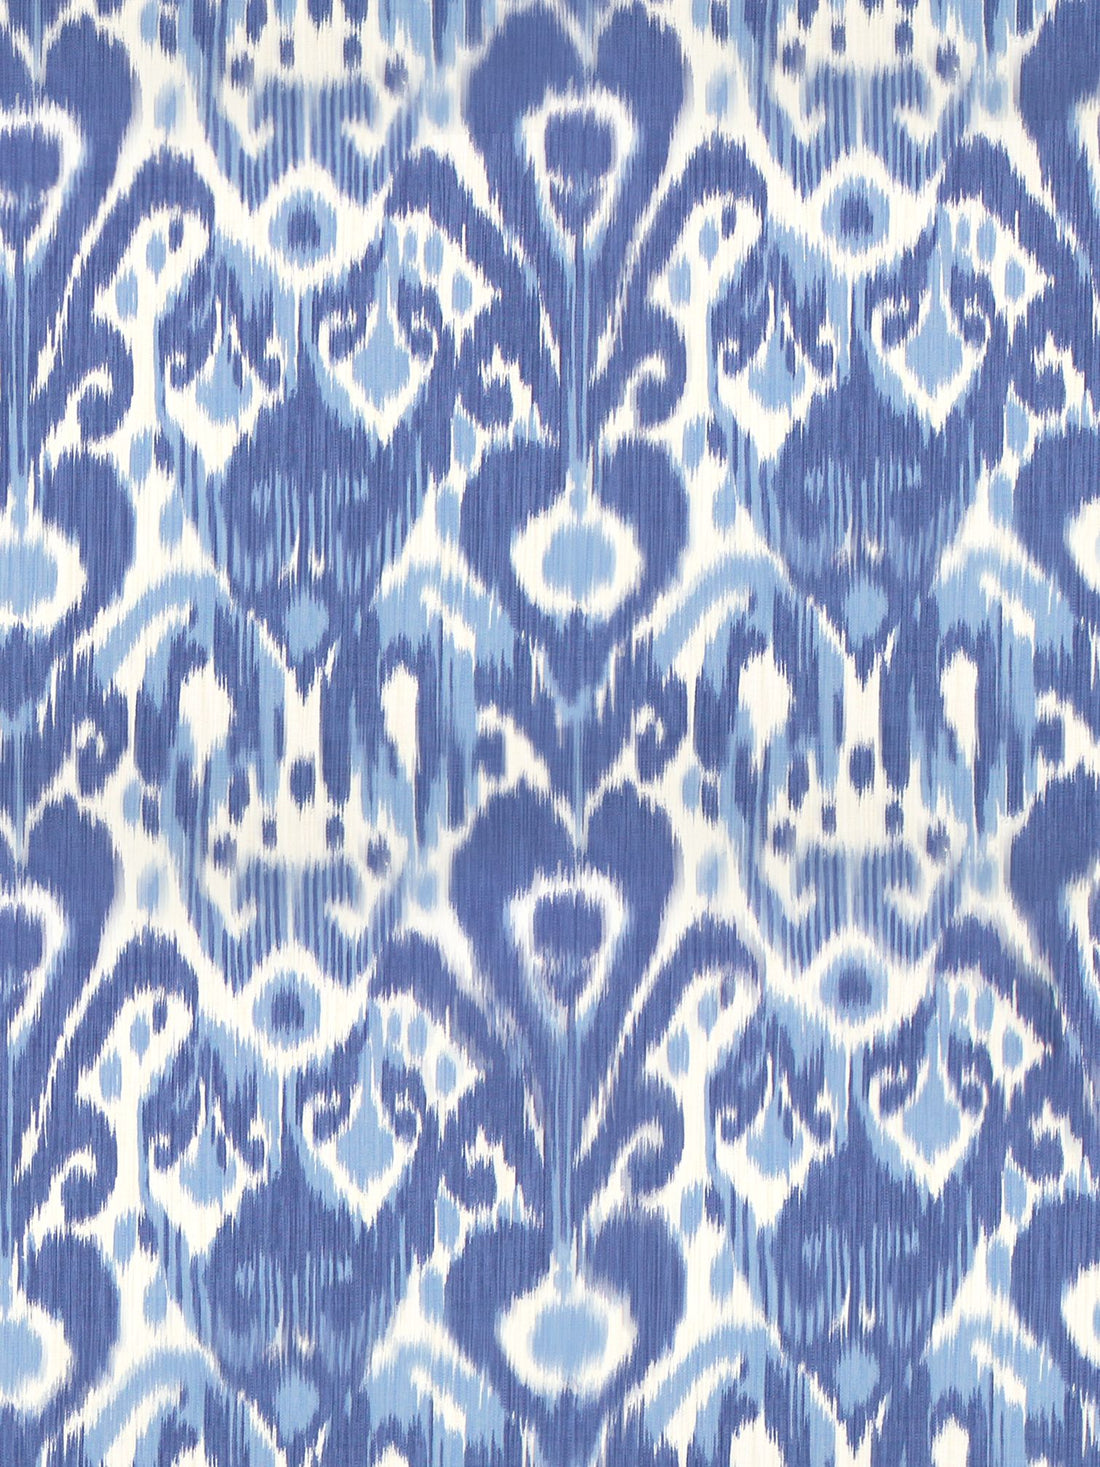 Greystone fabric in indigo color - pattern number SC 000216527 - by Scalamandre in the Scalamandre Fabrics Book 1 collection